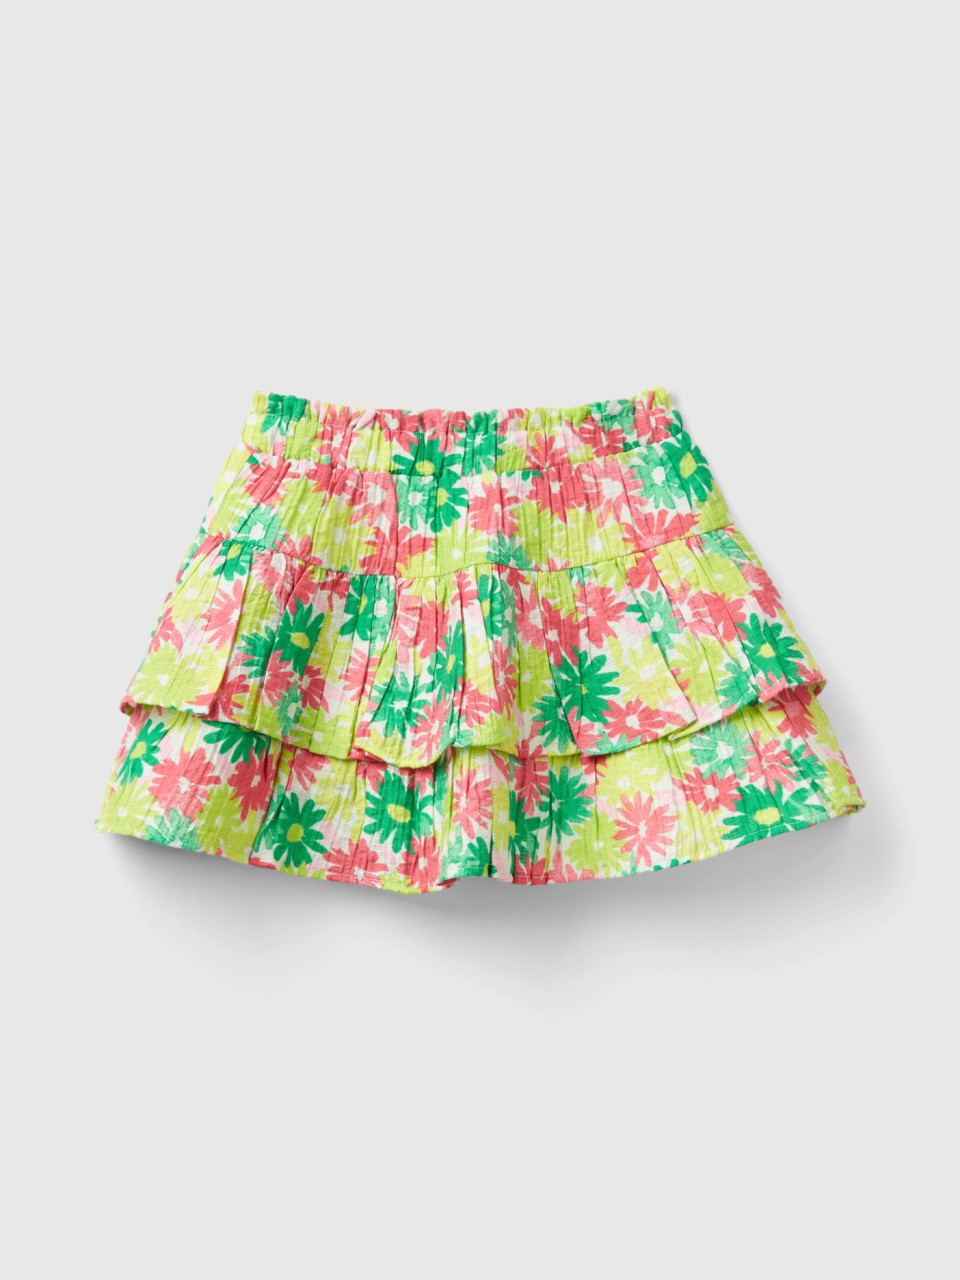 Benetton, Skirt With Floral Print, Multi-color, Kids